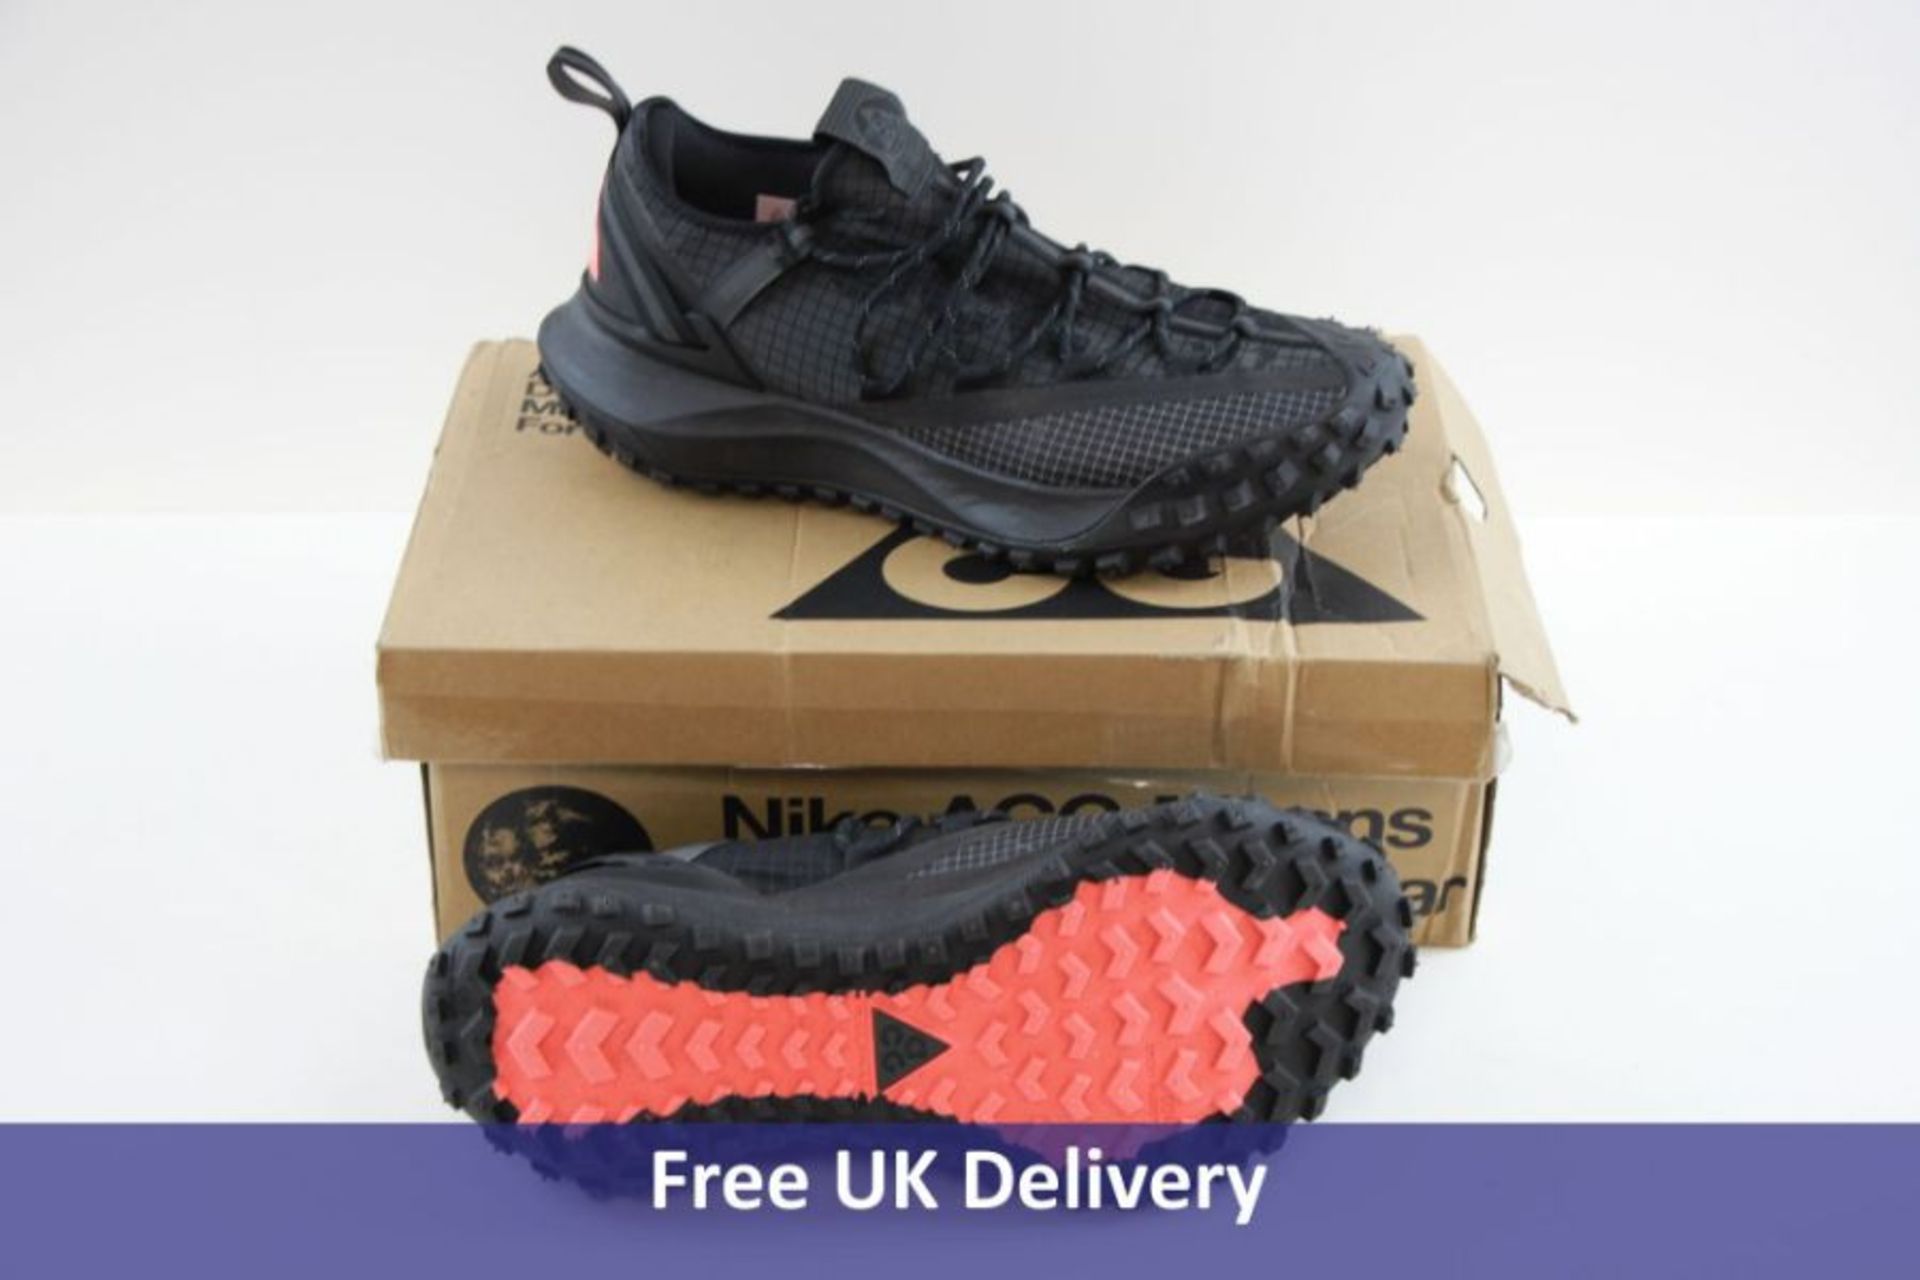 Nike Men's ACG Mountain Fly Low Trainers, Anthracite Black, UK 10.5